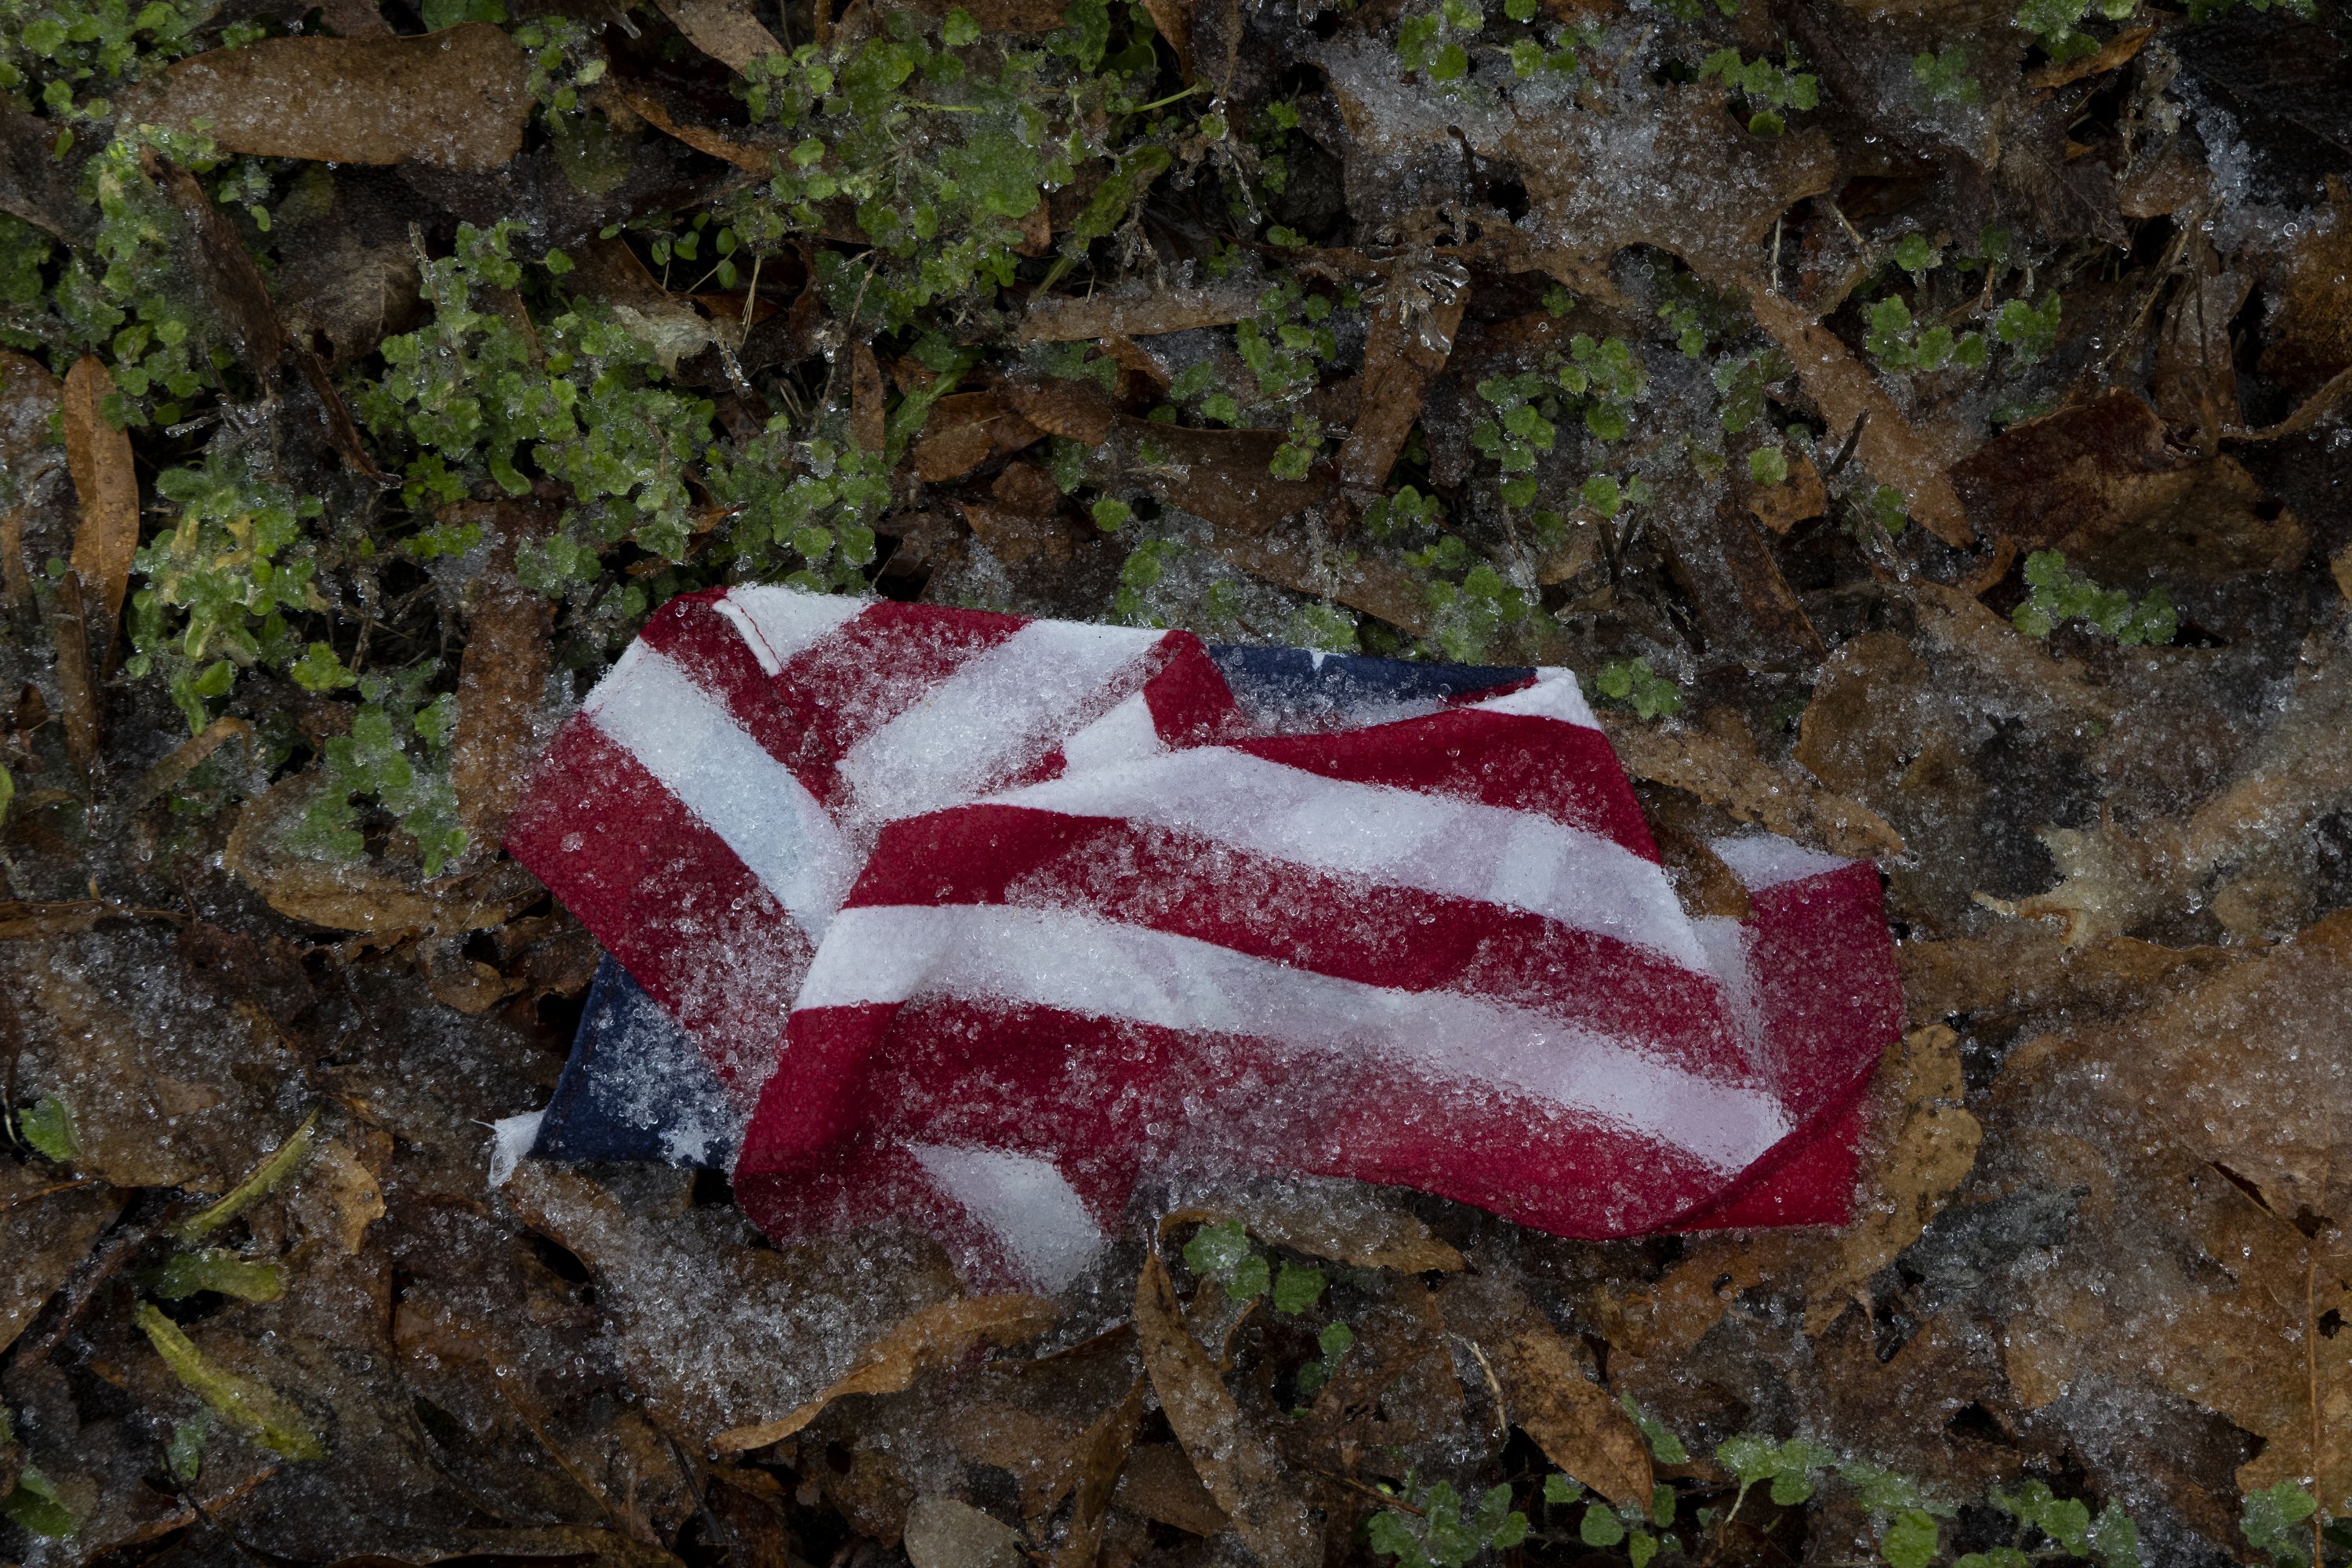  Ice begins to accumulate on a crumpled American flag